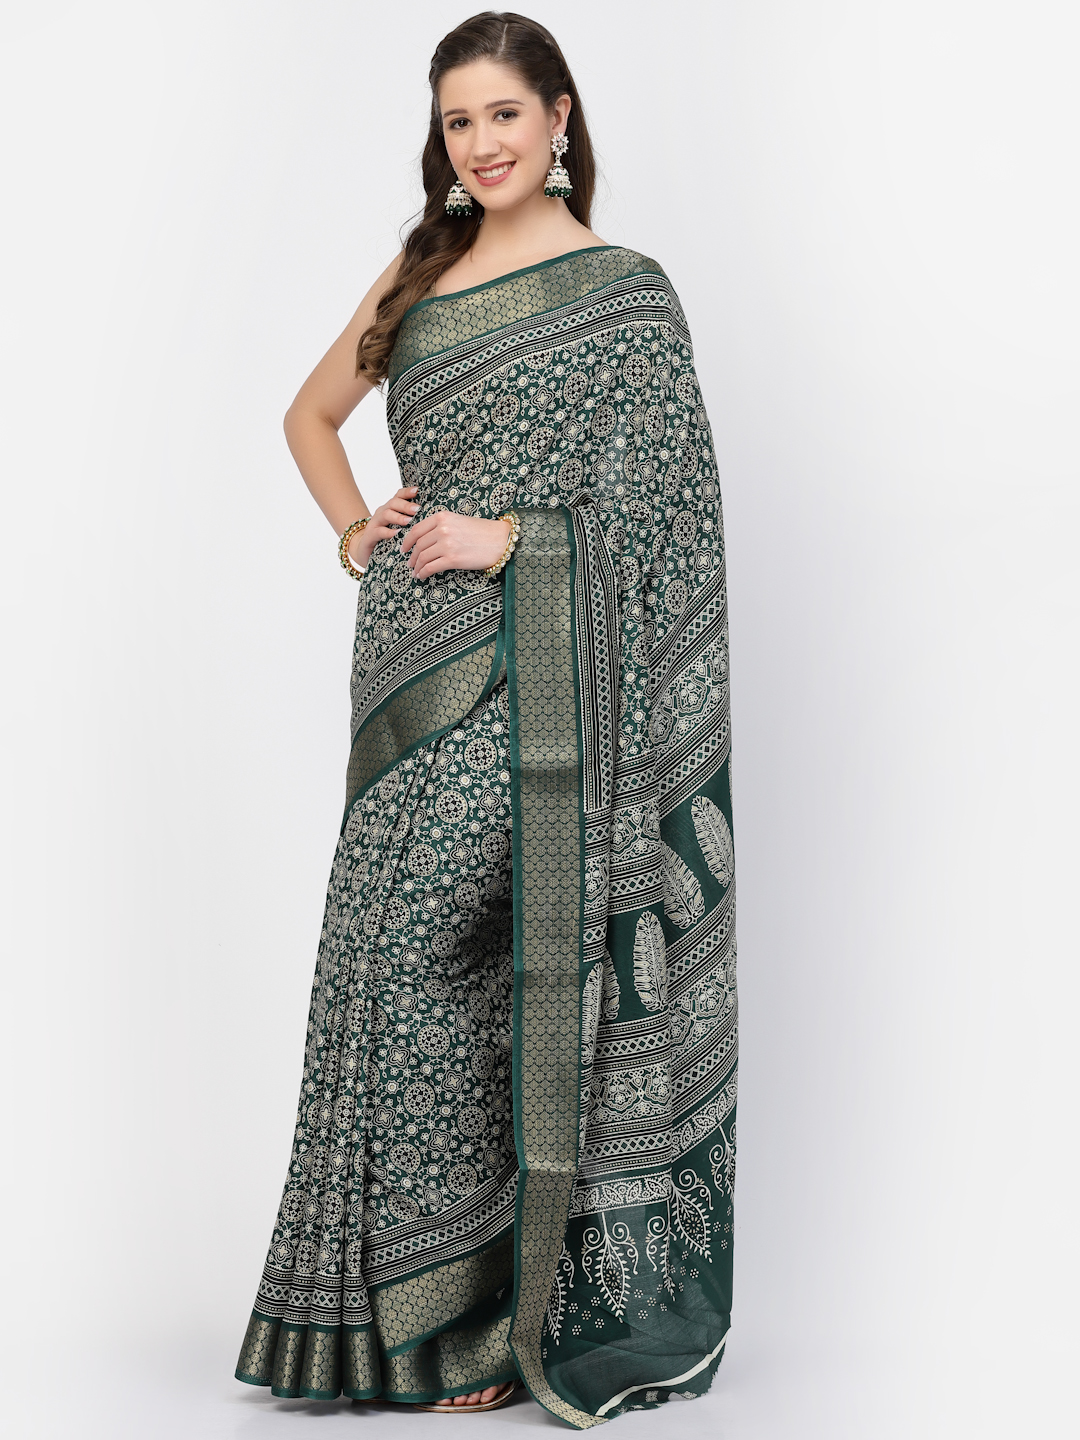 Women's Modal Cotton Floral Printed Saree with Unstitched Blouse